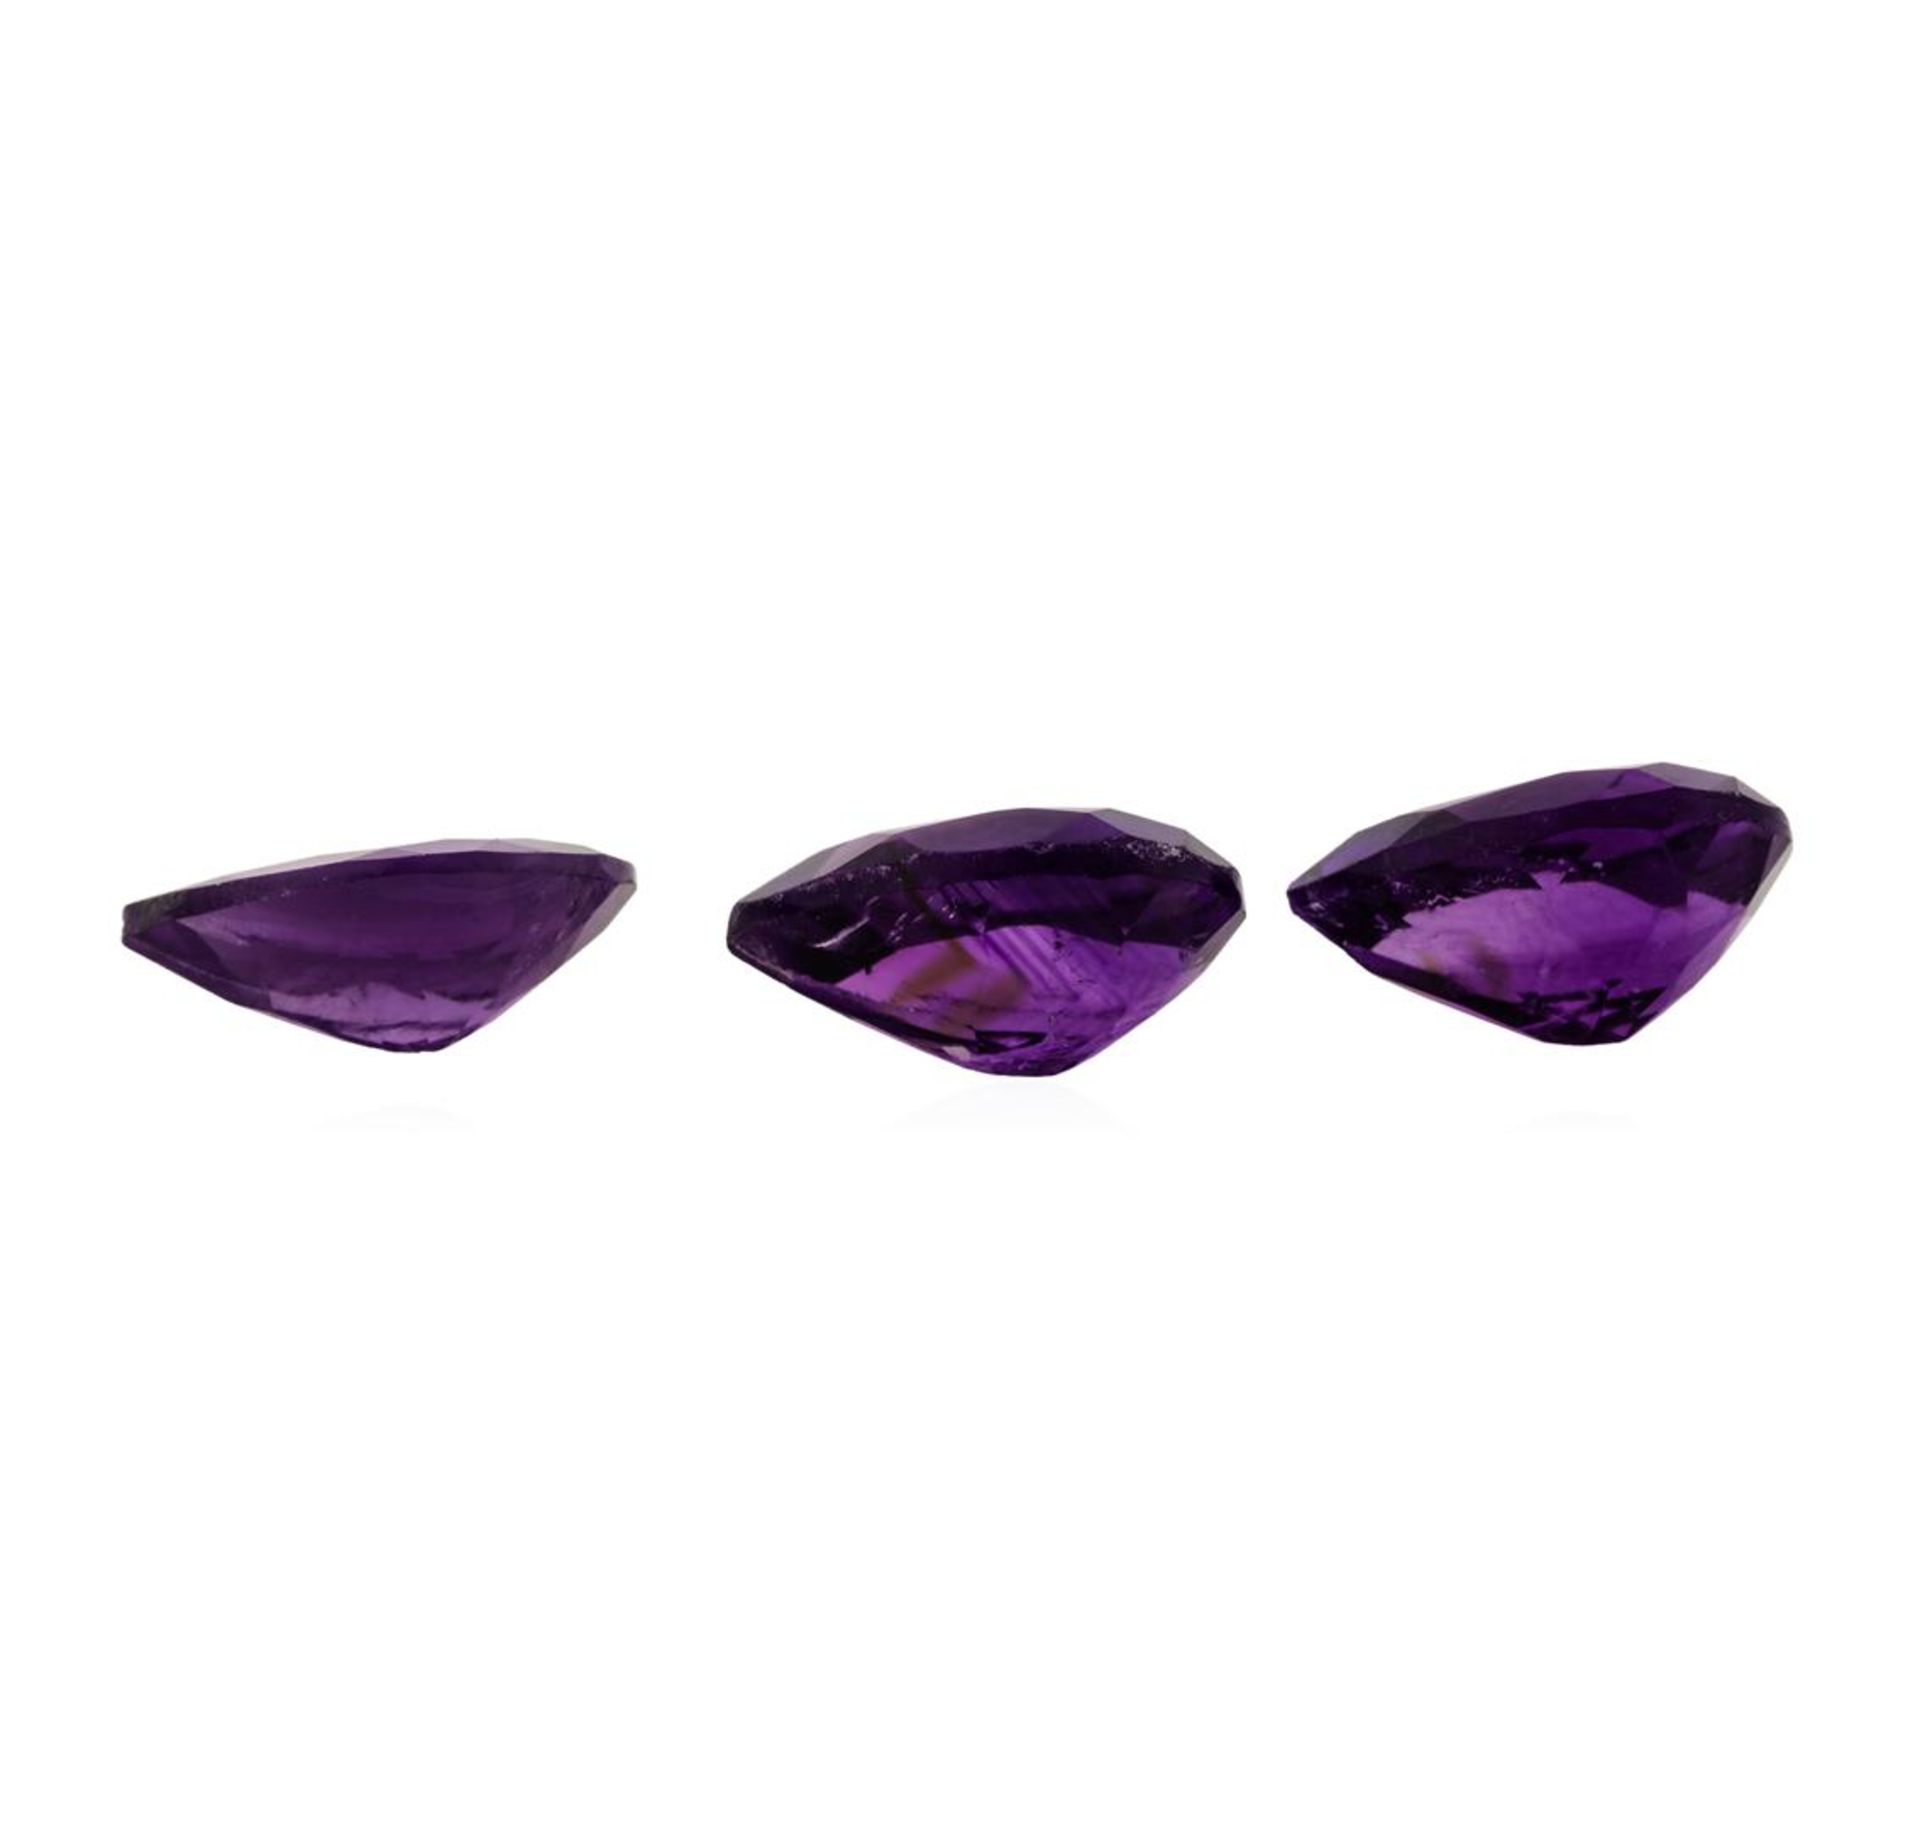 13.11ctw.Natural Pear Cut Amethyst Parcel of Two - Image 2 of 3